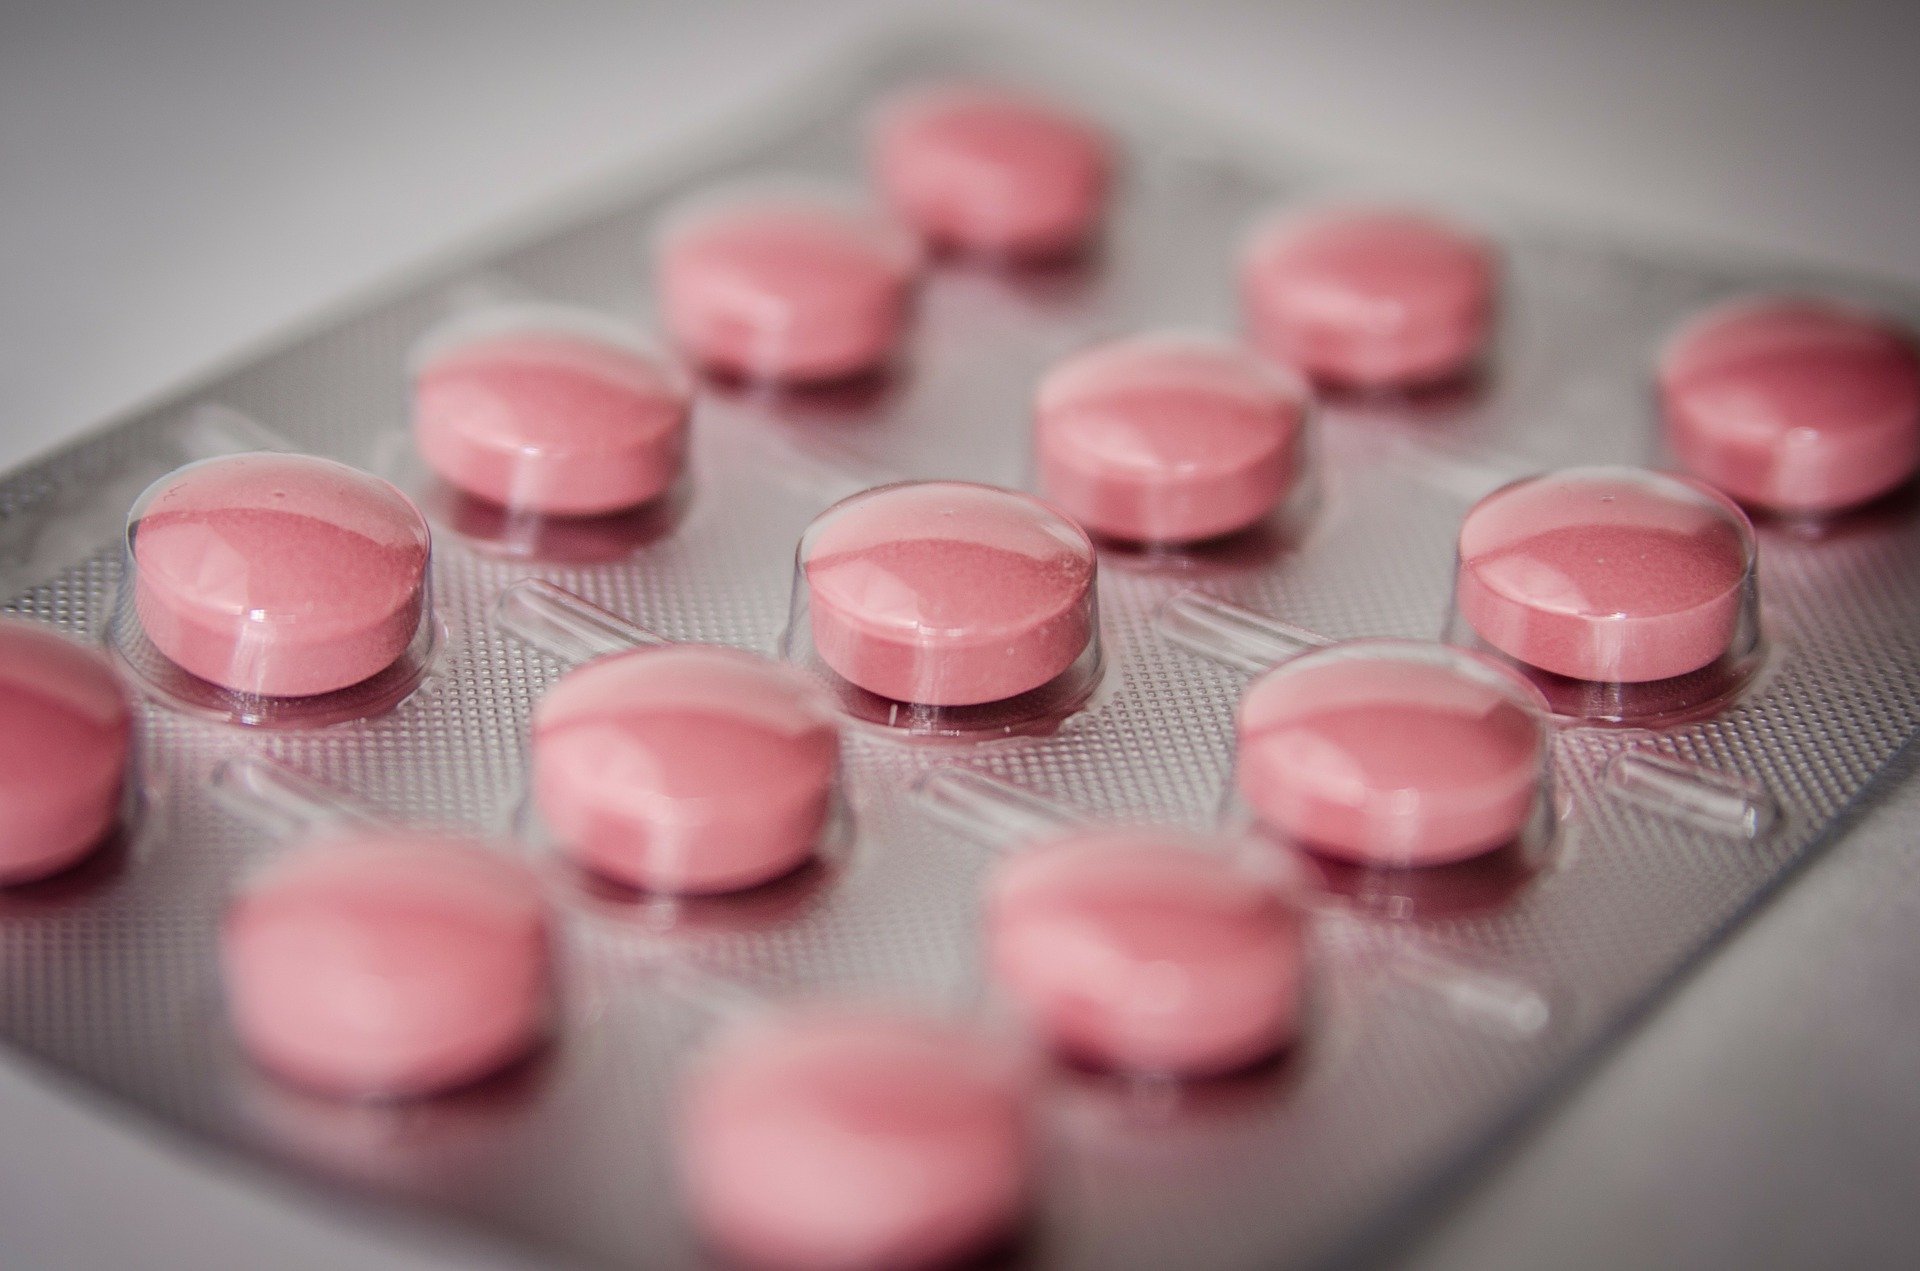 An up close view of a pack of pink medicine tablets in a medicine pack.  